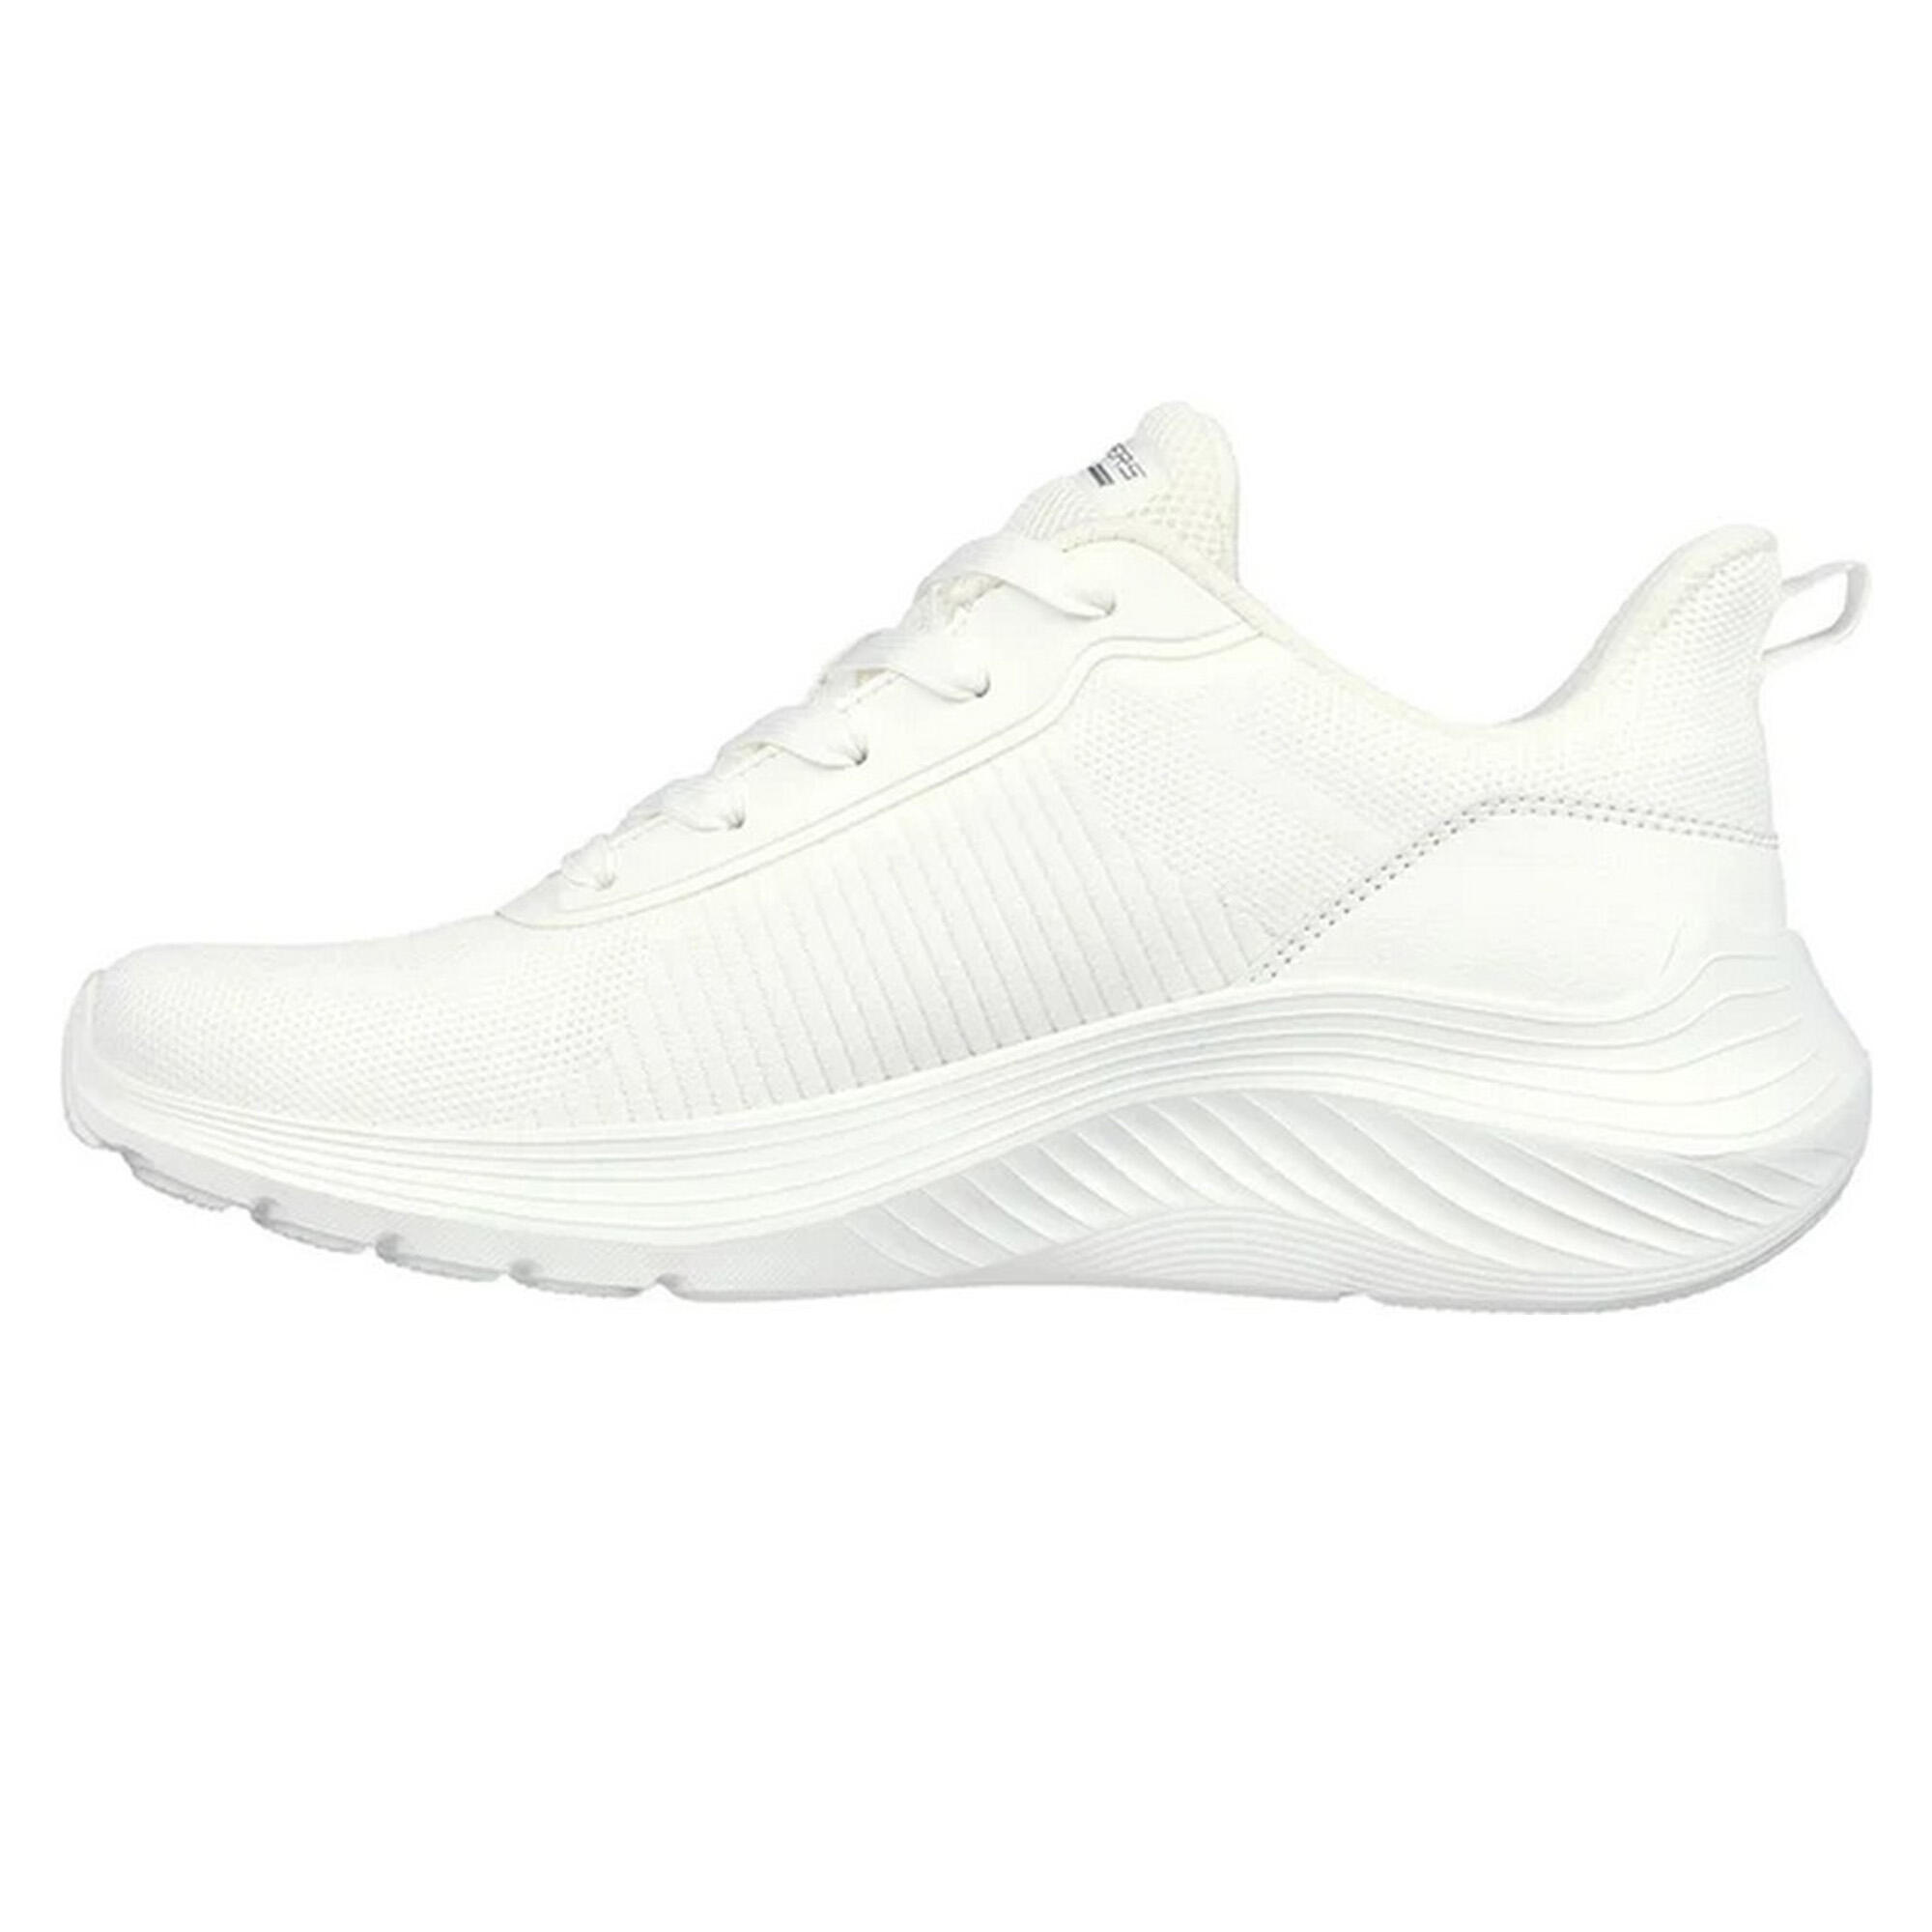 Womens/Ladies Bobs Squad Waves Trainers (Off White) 2/5